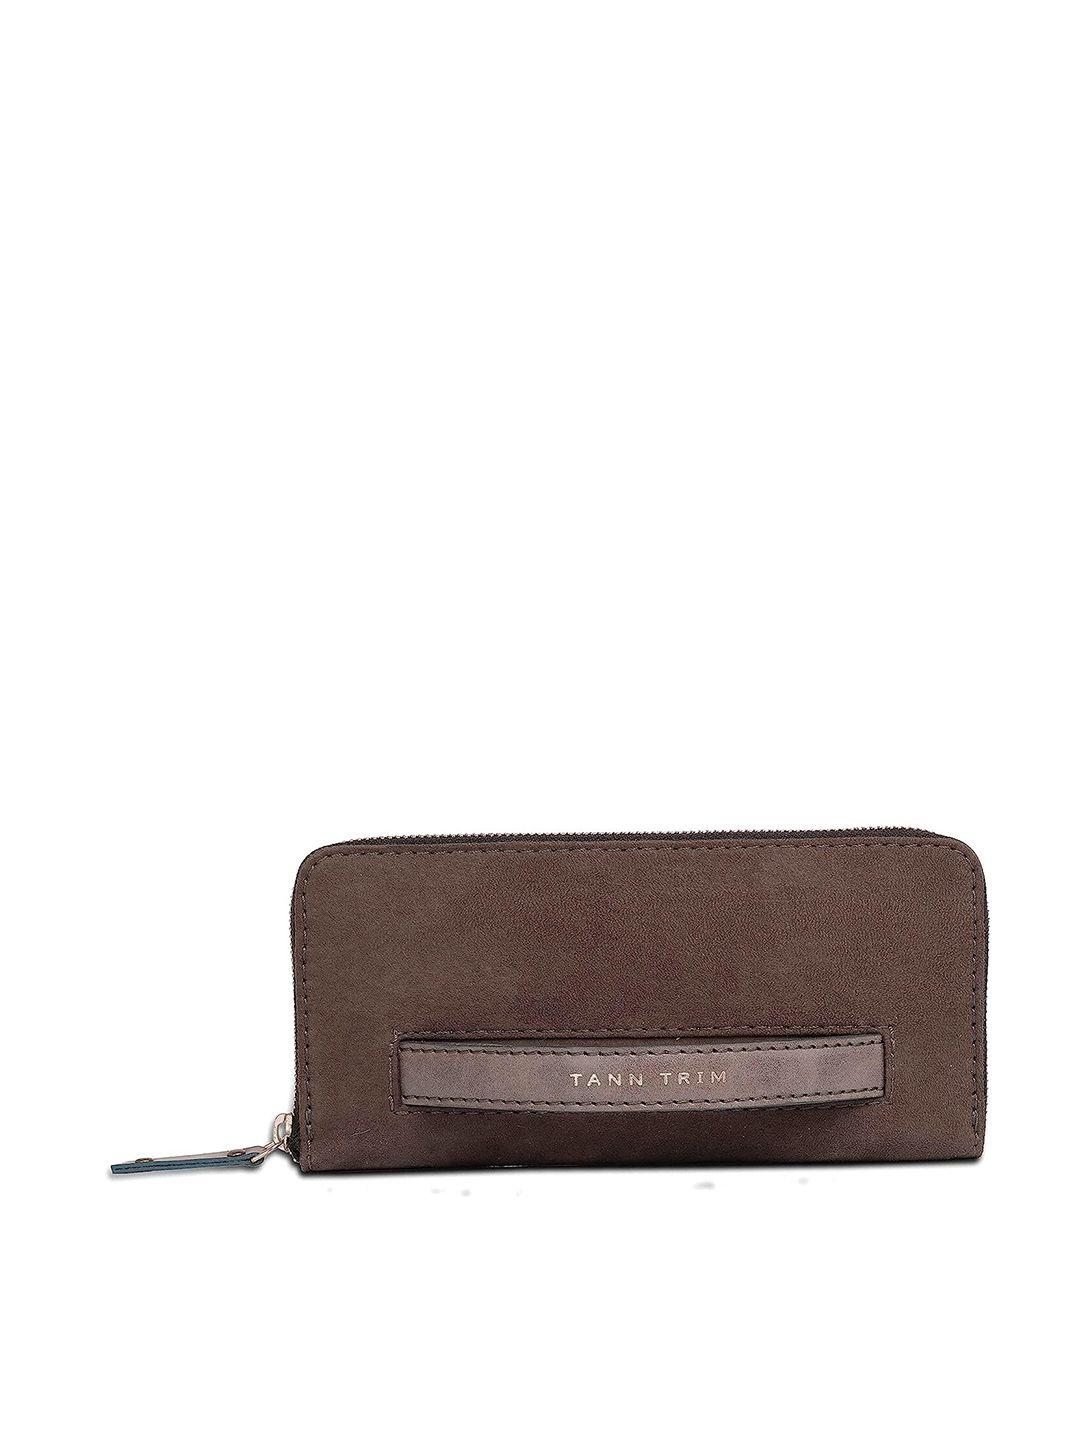 tann trim synthetic leather zip around wallet